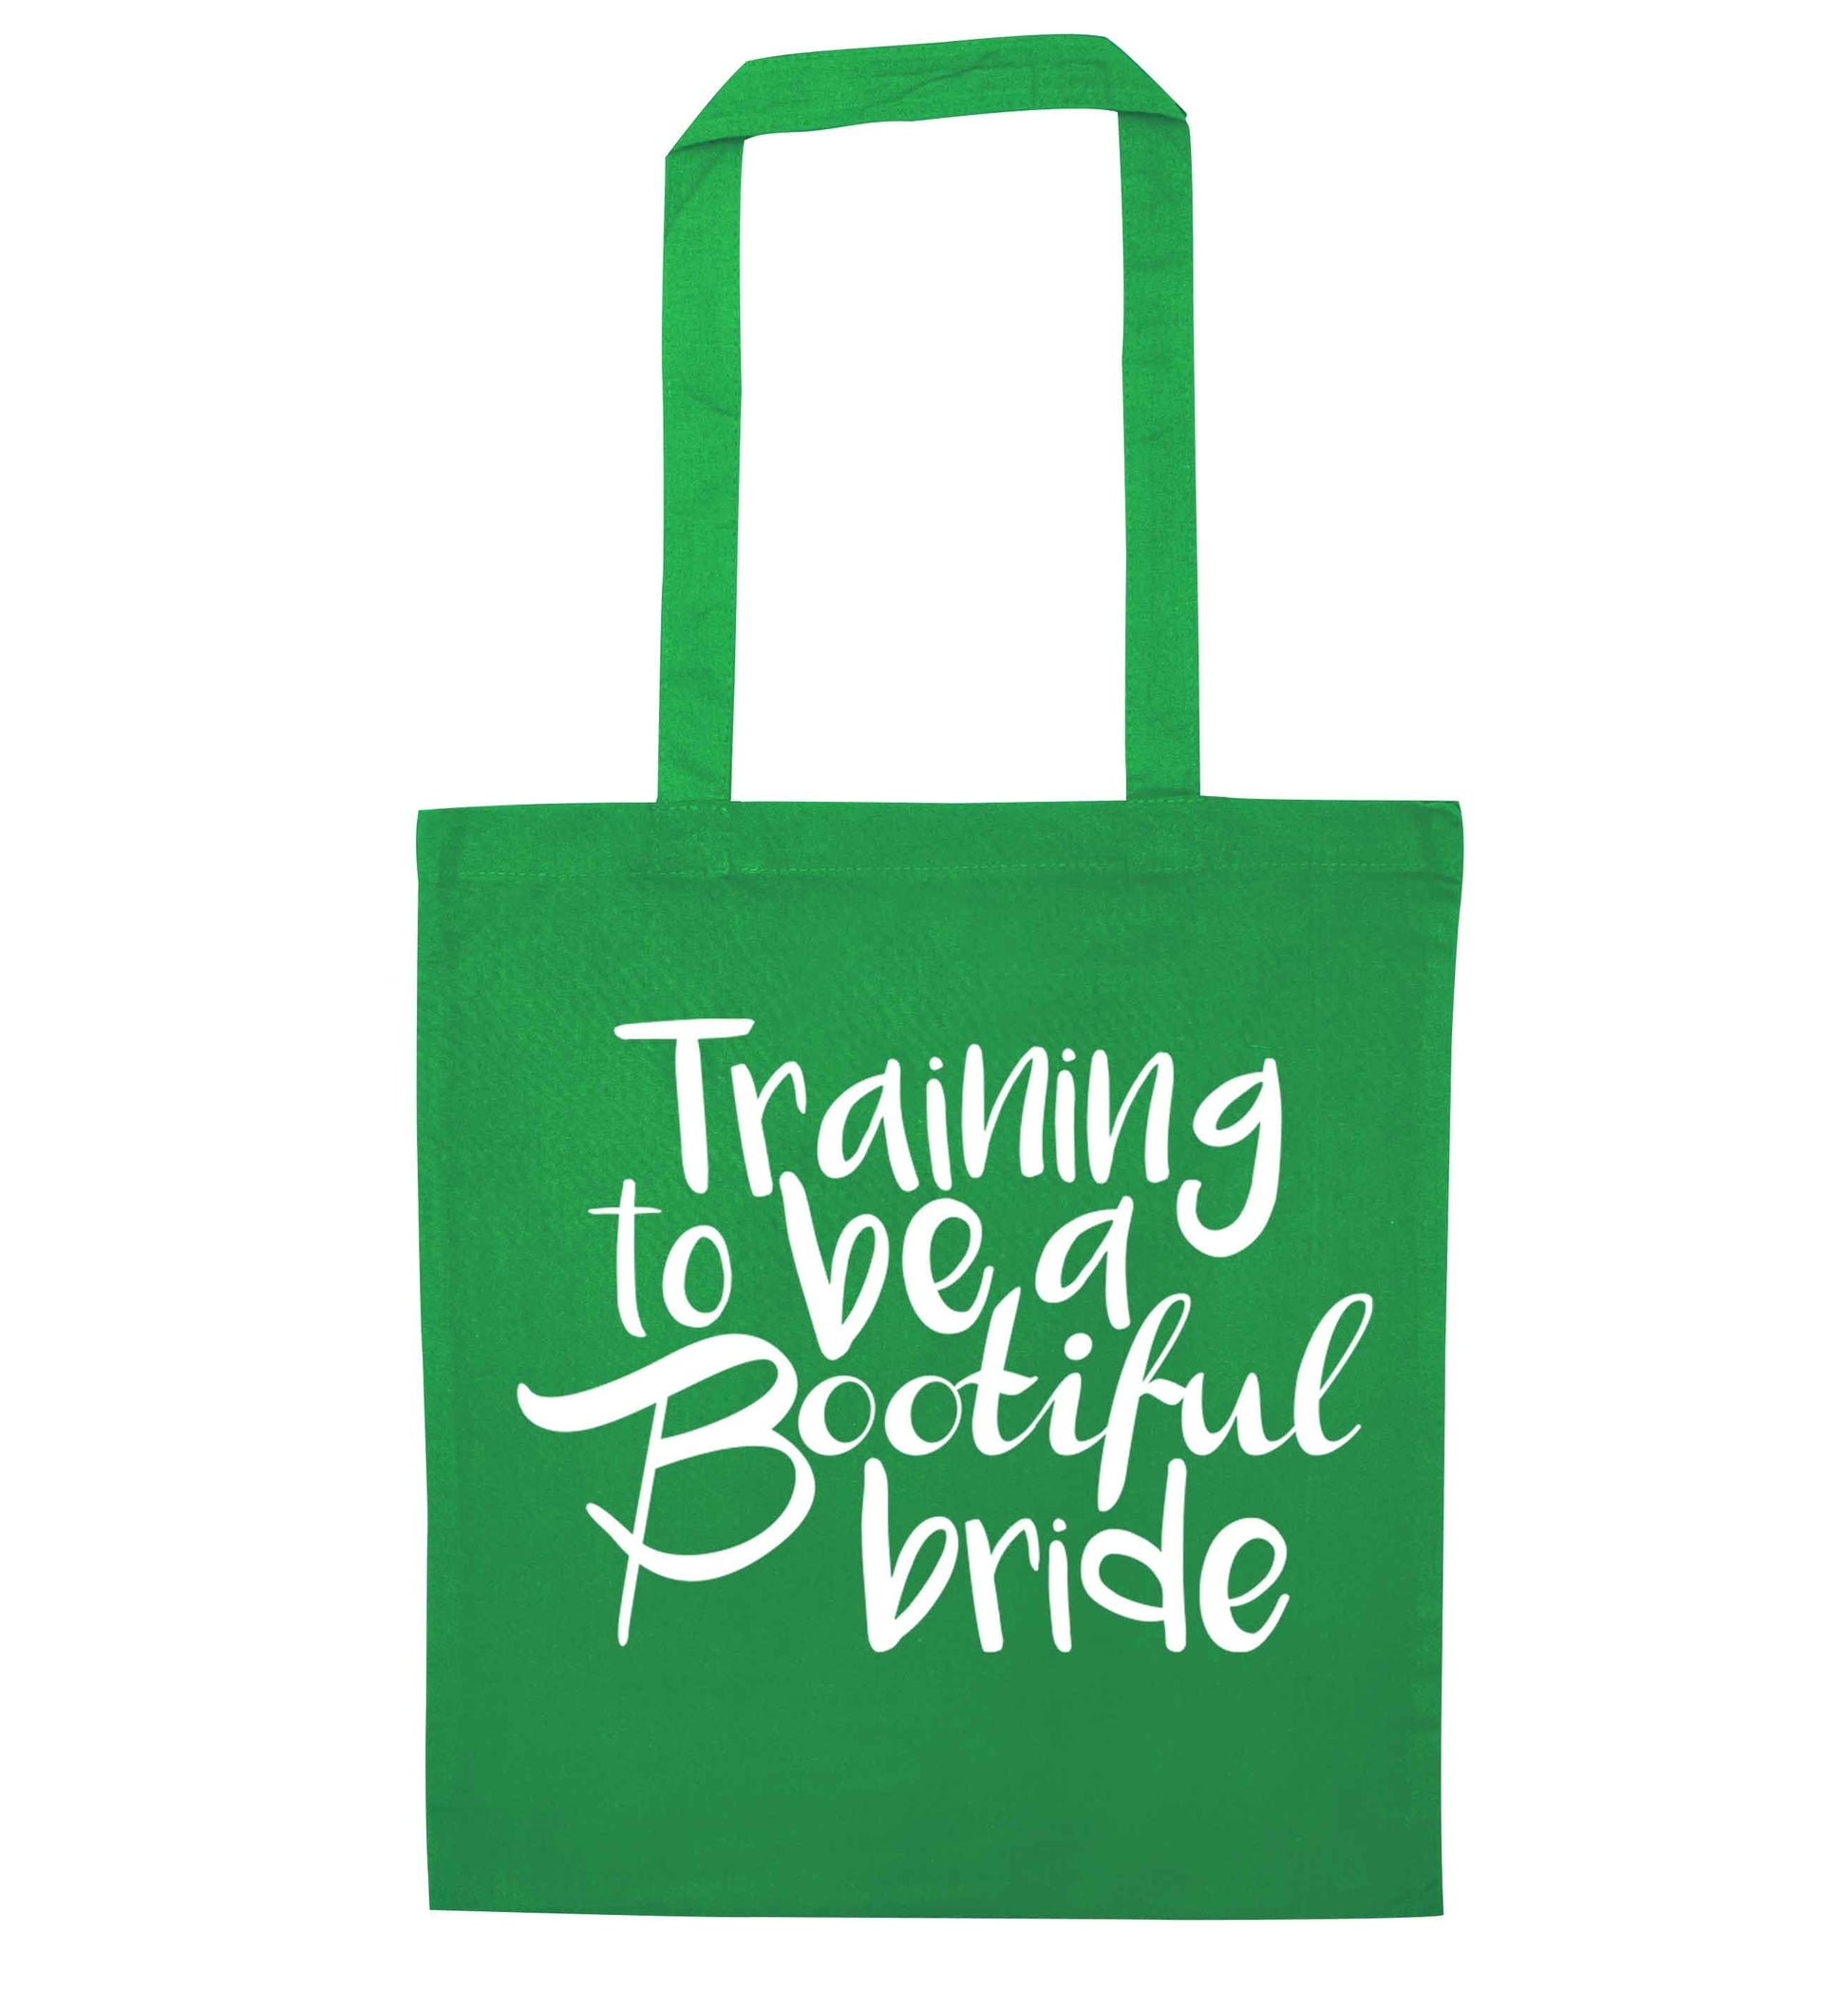 Get motivated and get fit for your big day! Our workout quotes and designs will get you ready to sweat! Perfect for any bride, groom or bridesmaid to be!  green tote bag